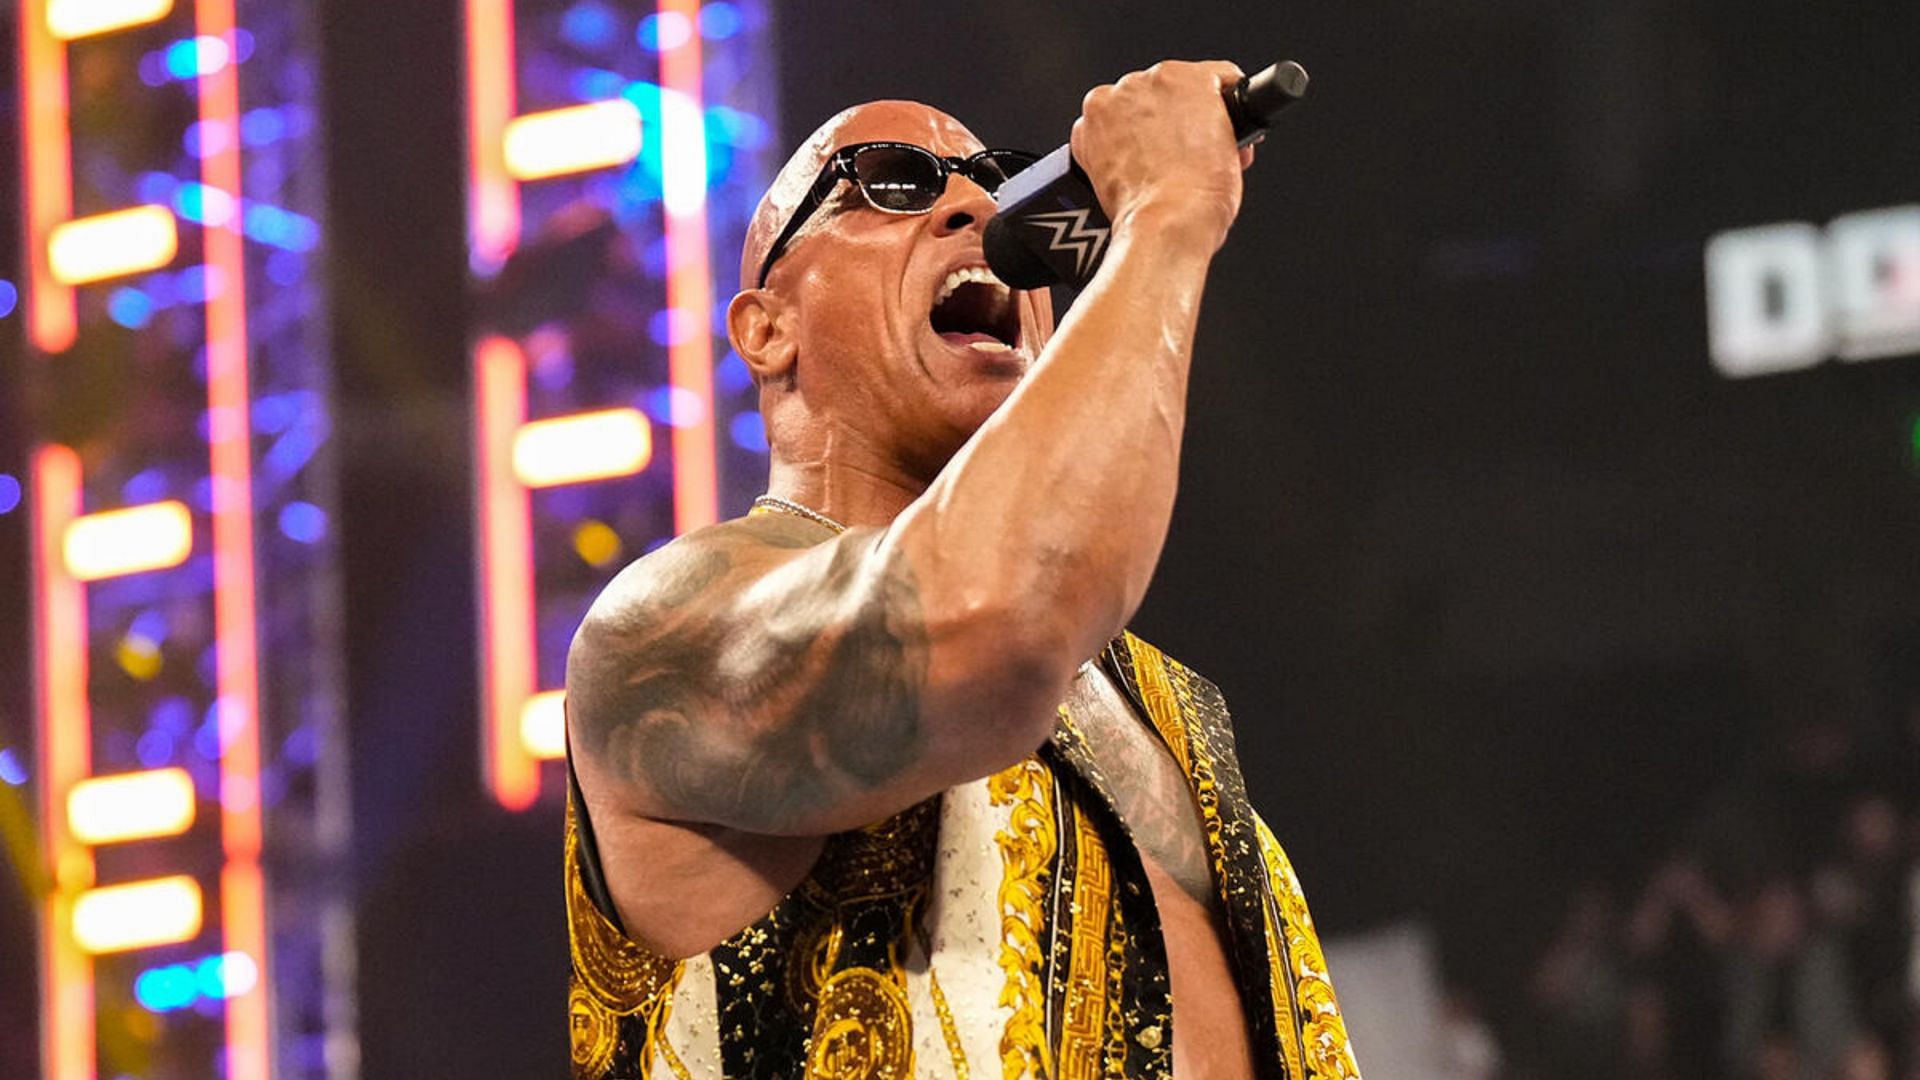 The Rock joined The Bloodline on WWE SmackDown